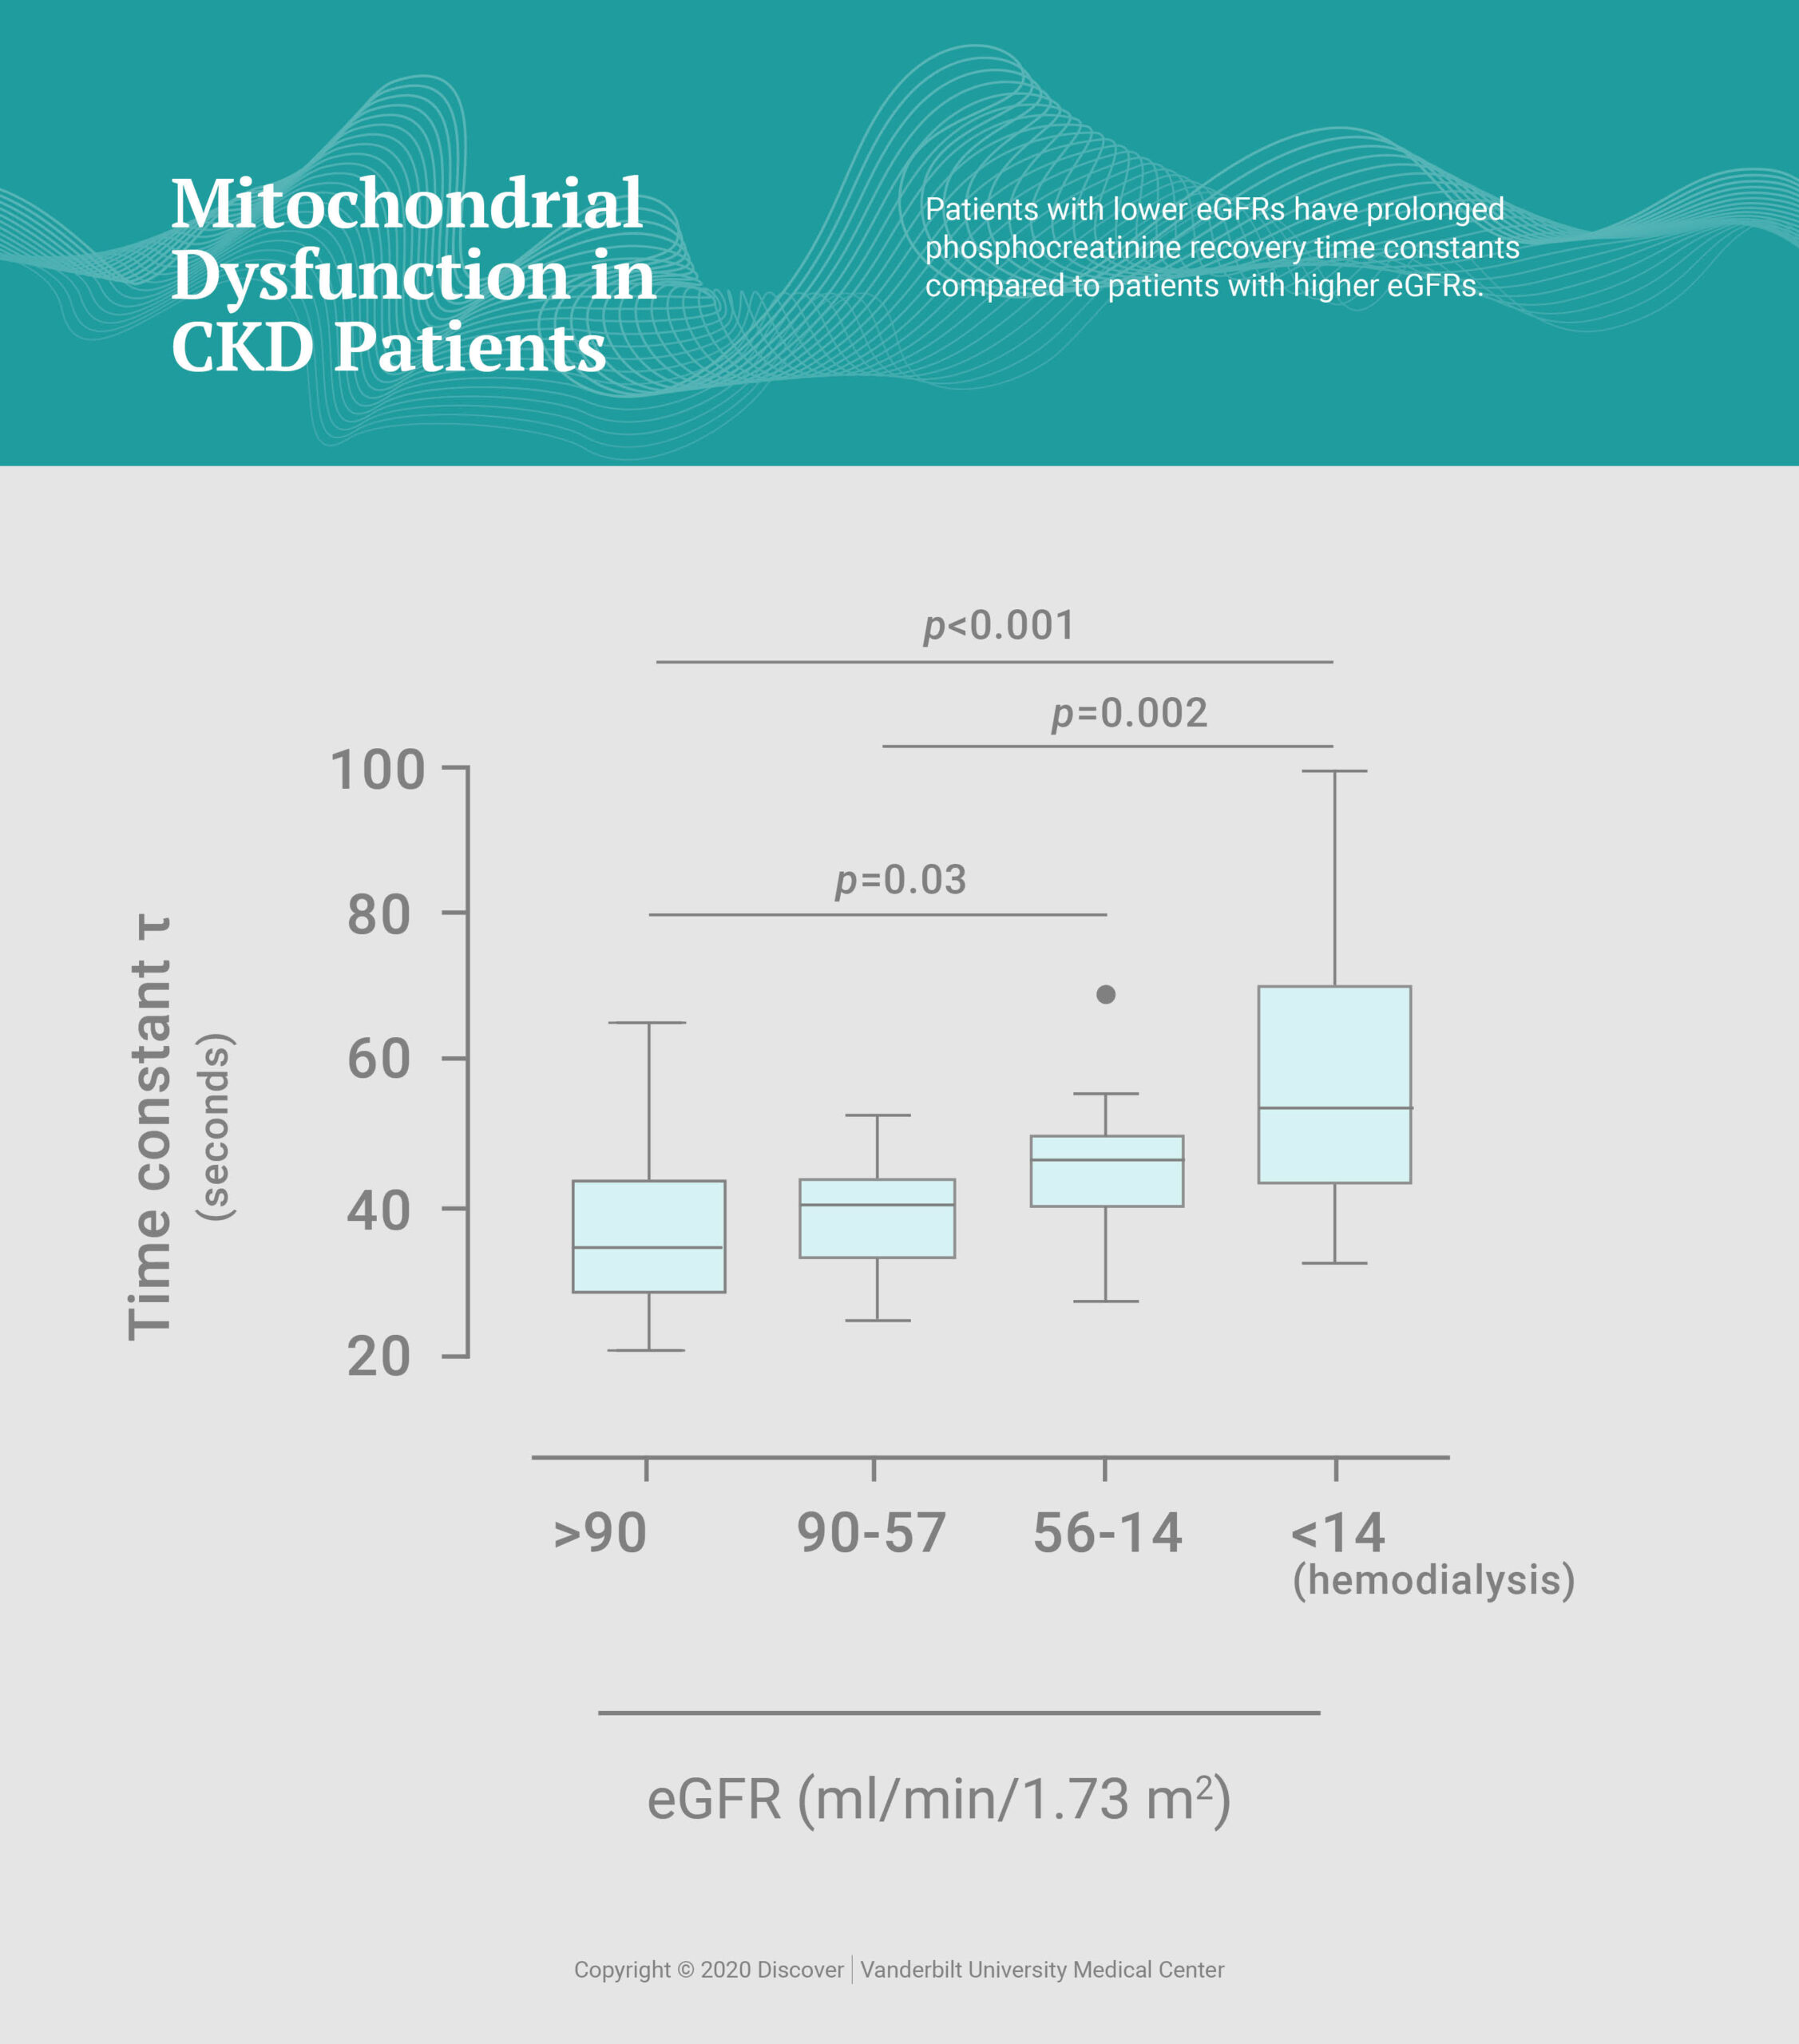 Targeting Mitochondrial Dysfunction to Ease CKD Complications